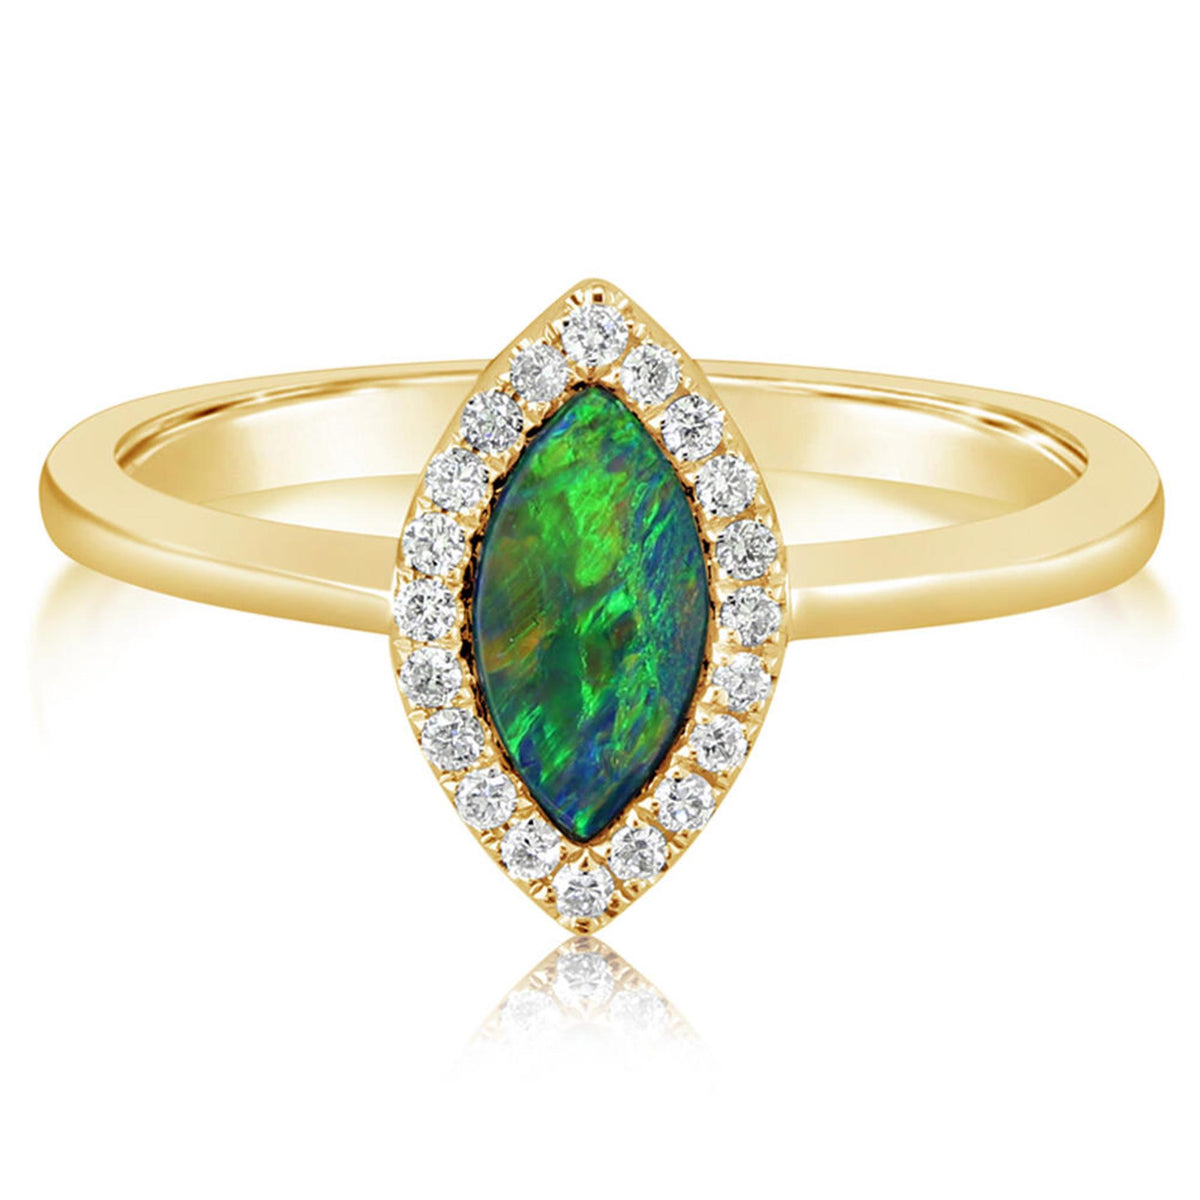 14Kt Yellow Gold Halo Ring With 0.65ct Australian Boulder Opal Doublet